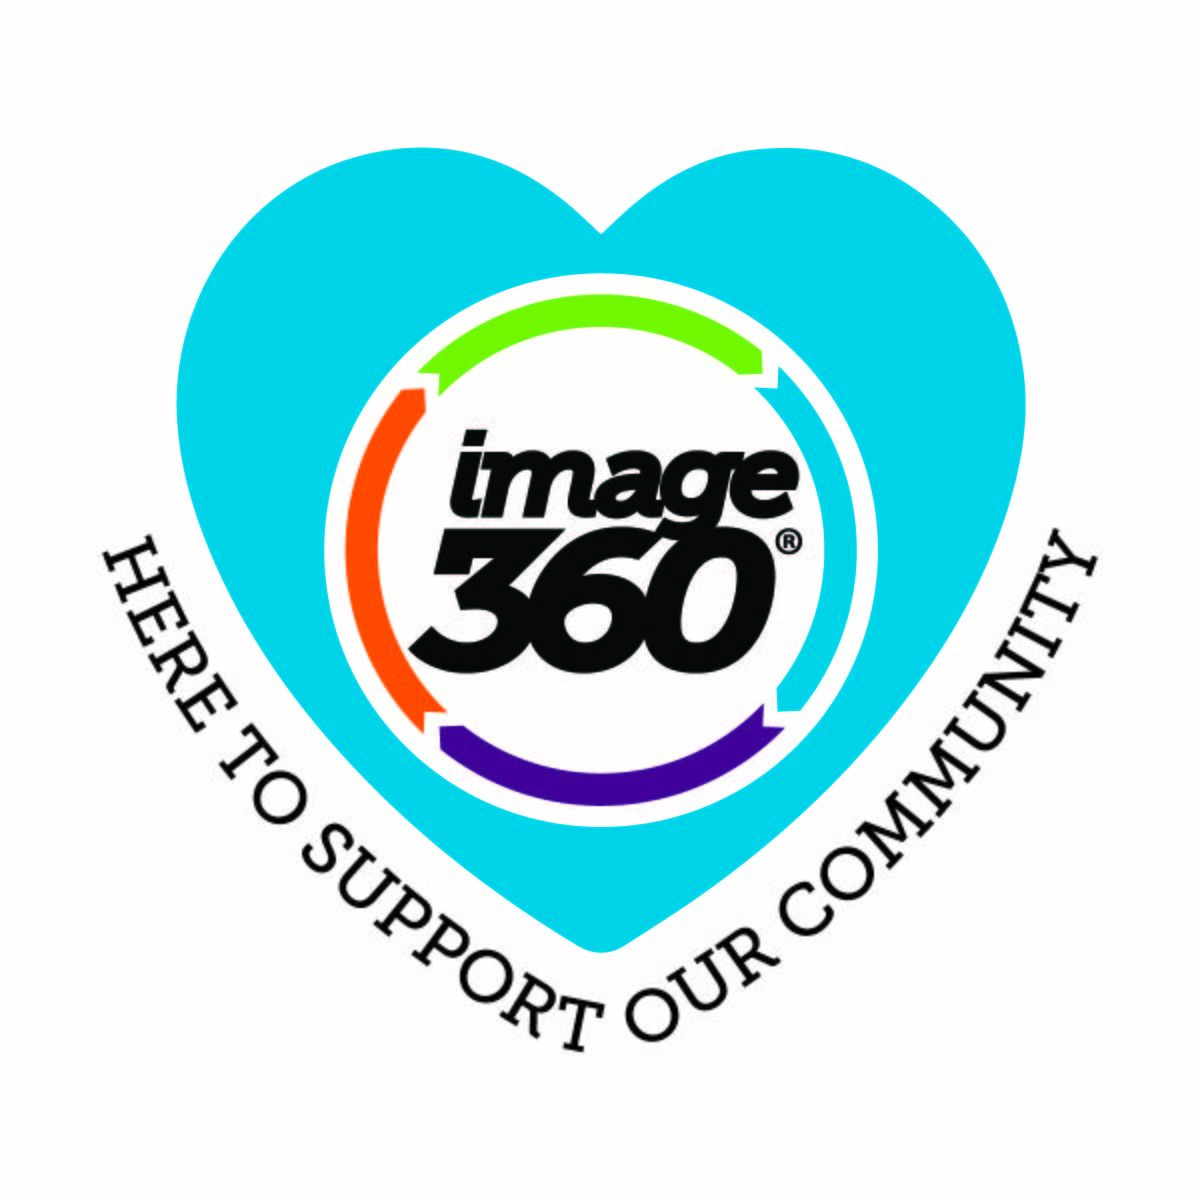 Image360 is Here to Support our Community